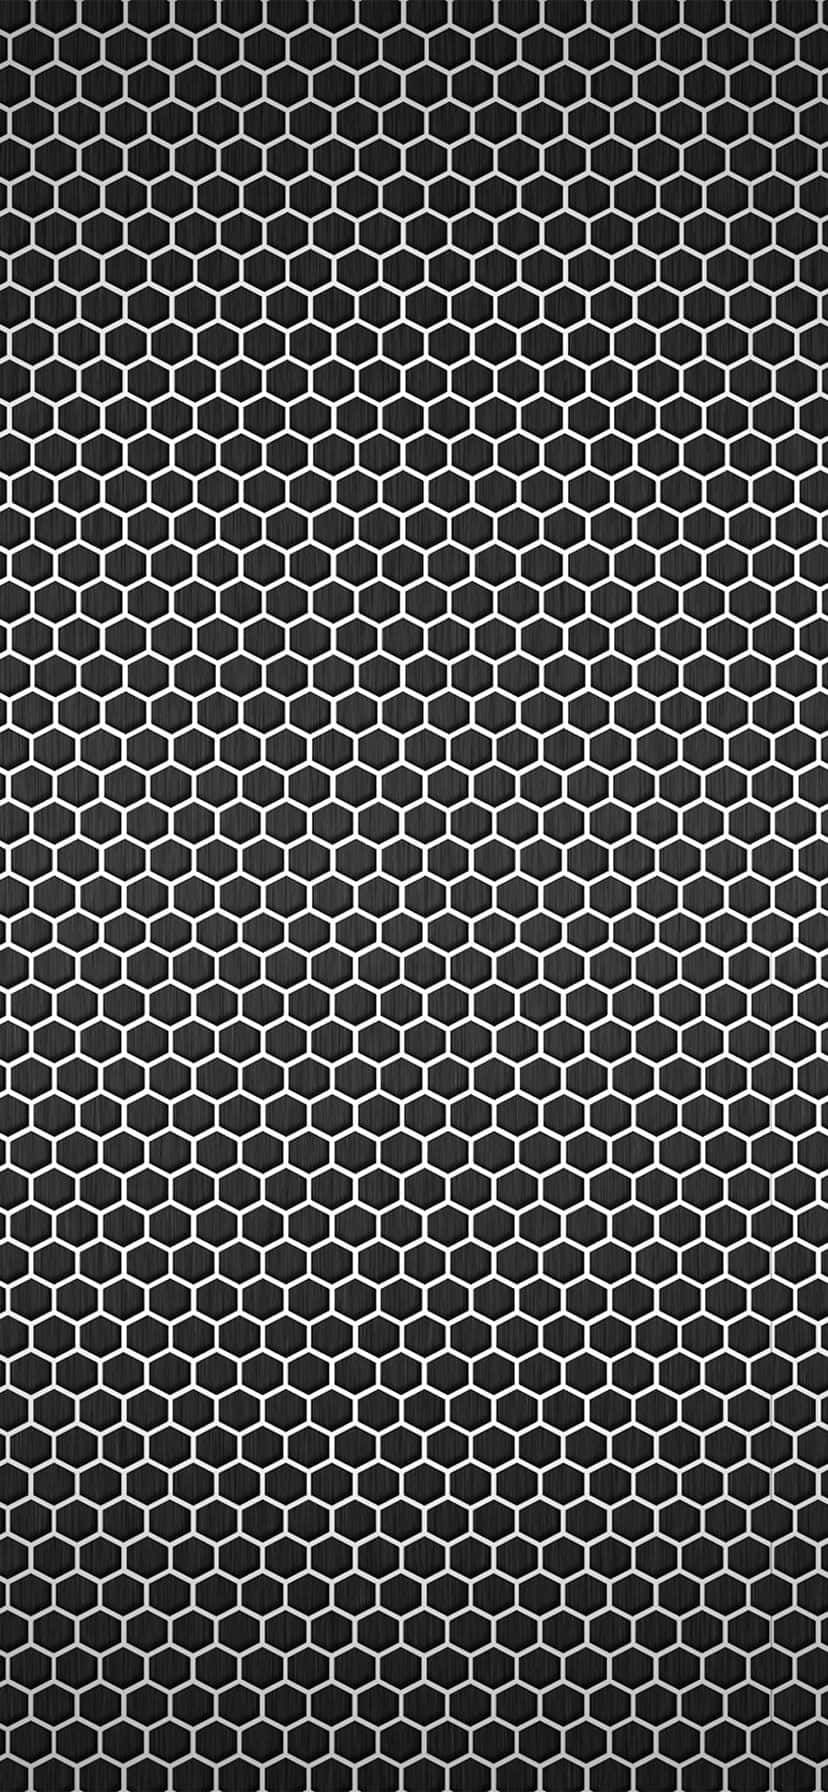 A Black And White Hexagonal Pattern On A Black Background Wallpaper